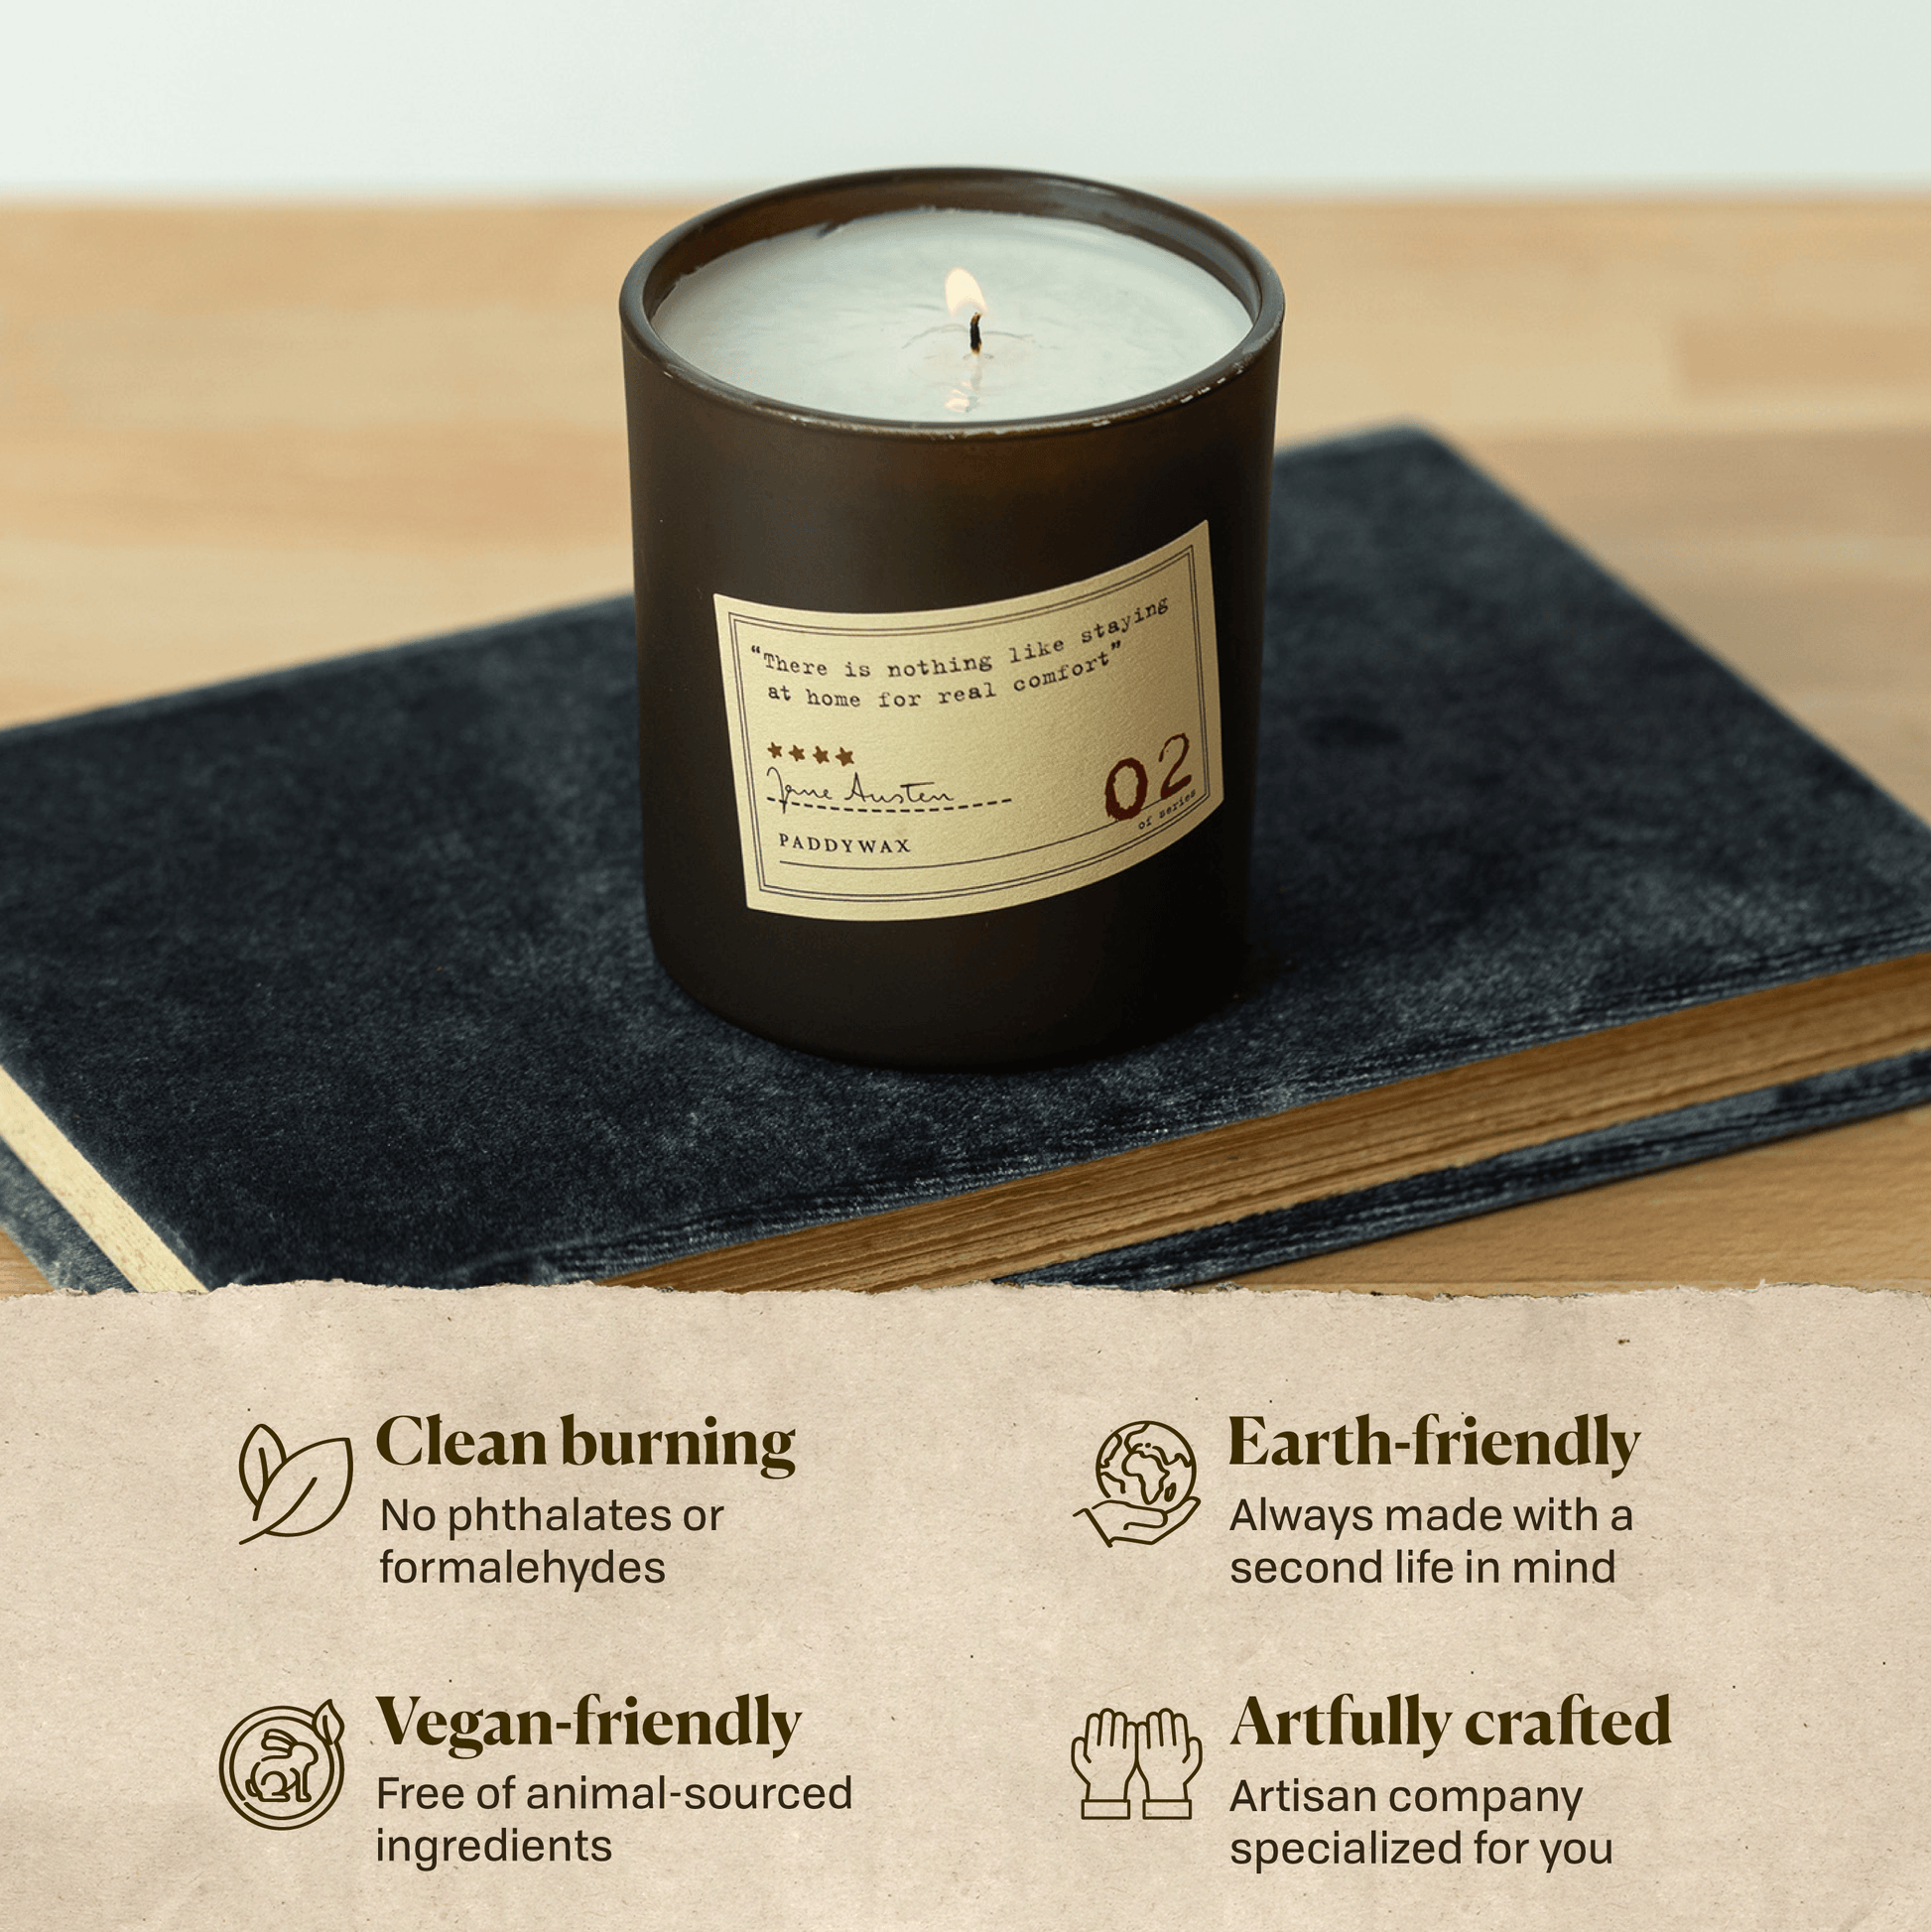 A photo of the Jane Austen candle sitting on a book. Clean burning: no phthalates or formaldehydes. Earth-friendly: Always made with a second life in mind. Vegan-friendly: Free of animal sourced ingredients. Artfully crafted: Artisan company specialized for you.